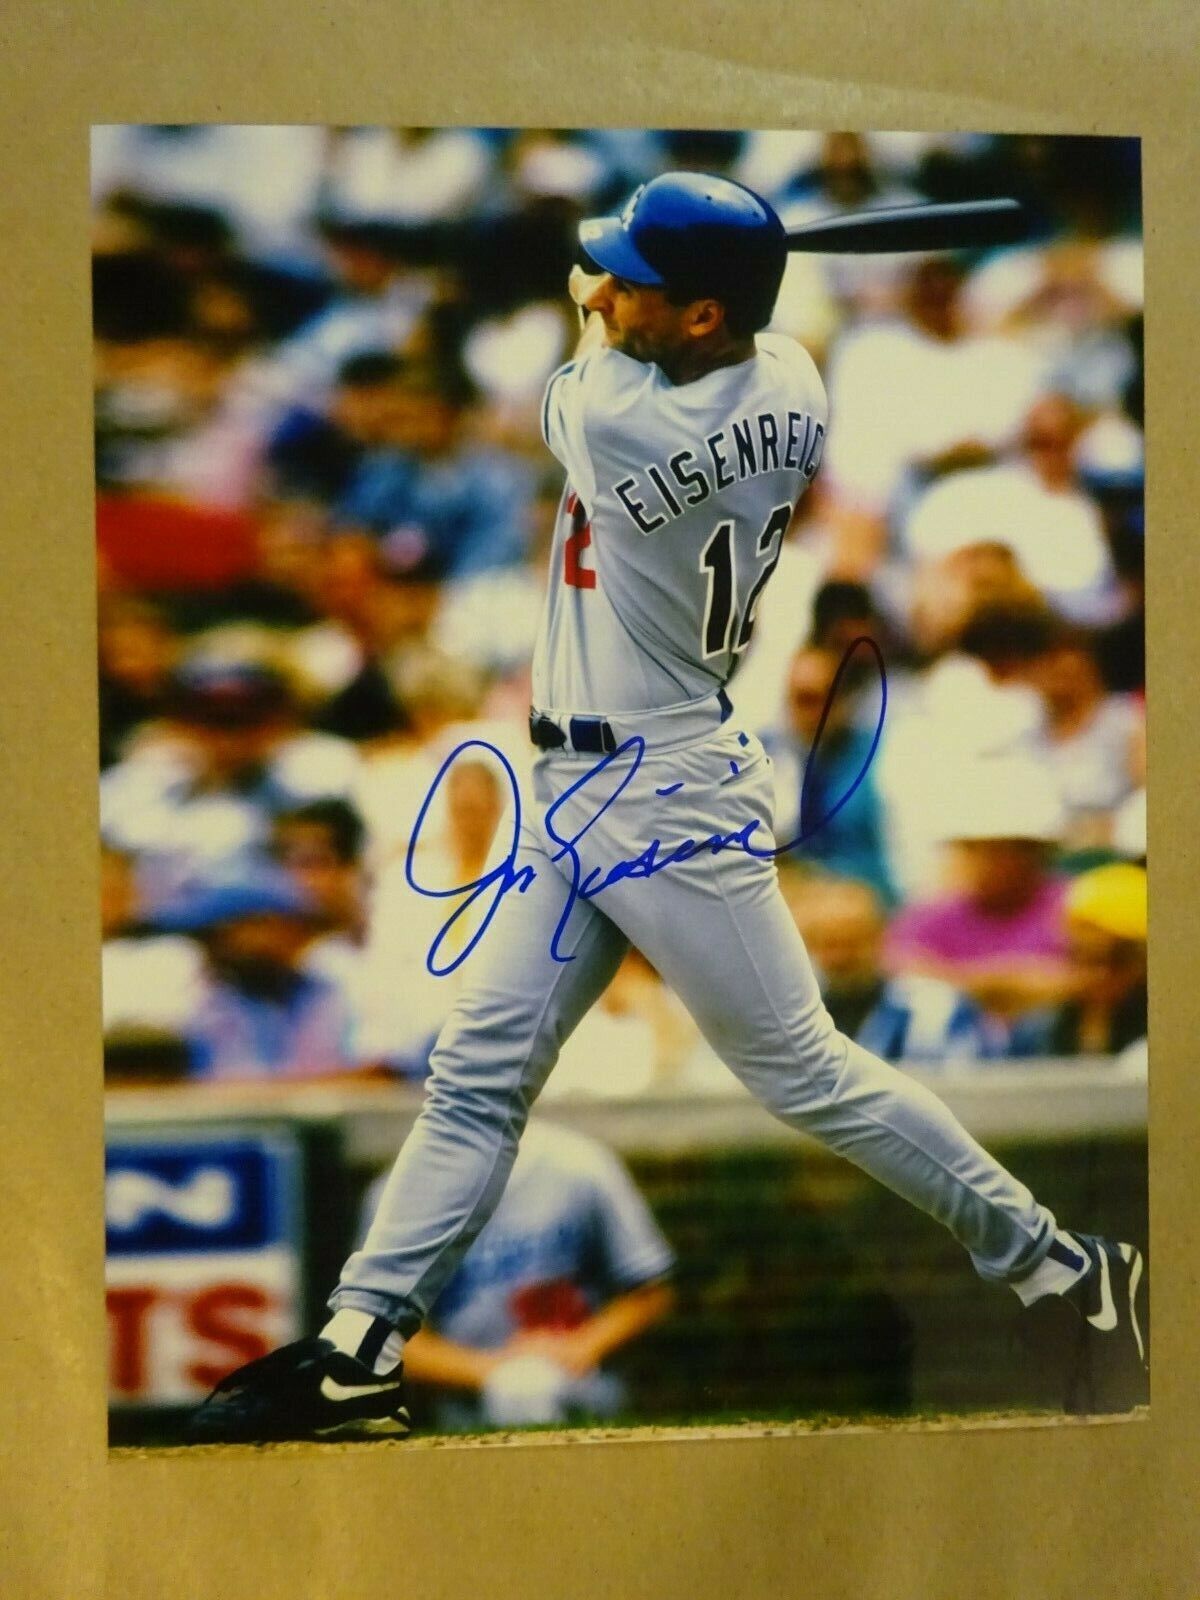 Autographed JIM EISENREICH Signed 8x10 Photo Poster paintinggraph Los Angeles Dodgers Baseball